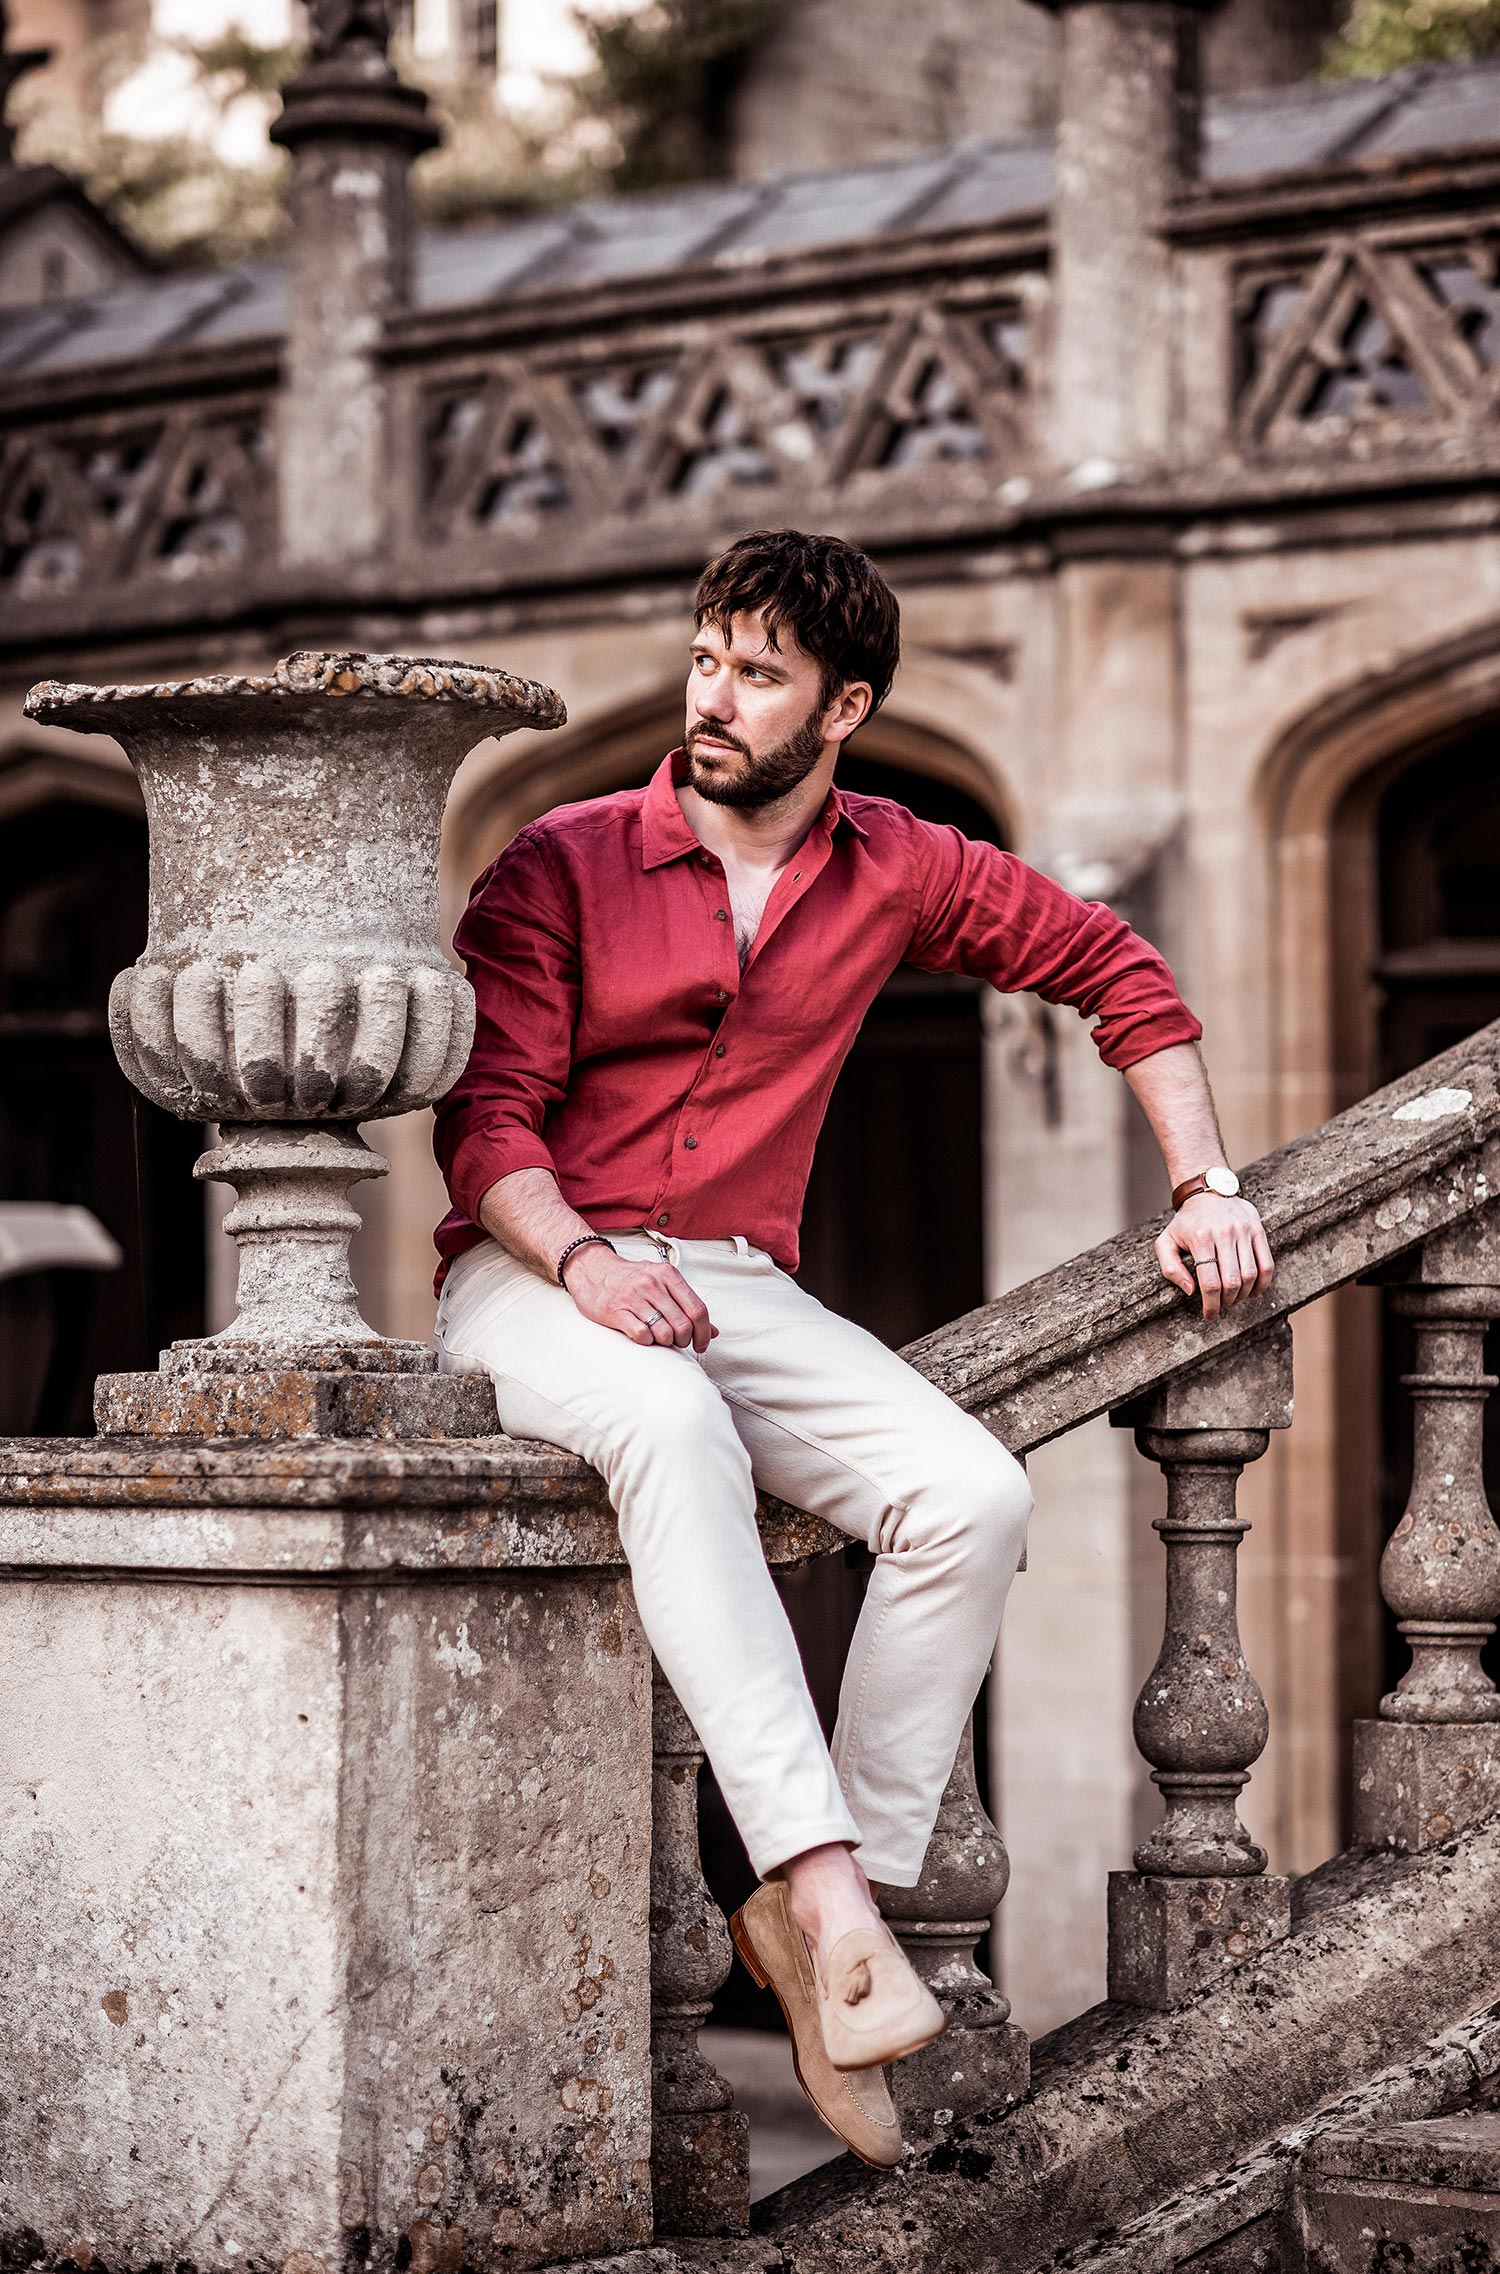 Red Linen Shirt With Skinny Jeans Outfit - Your Average Guy